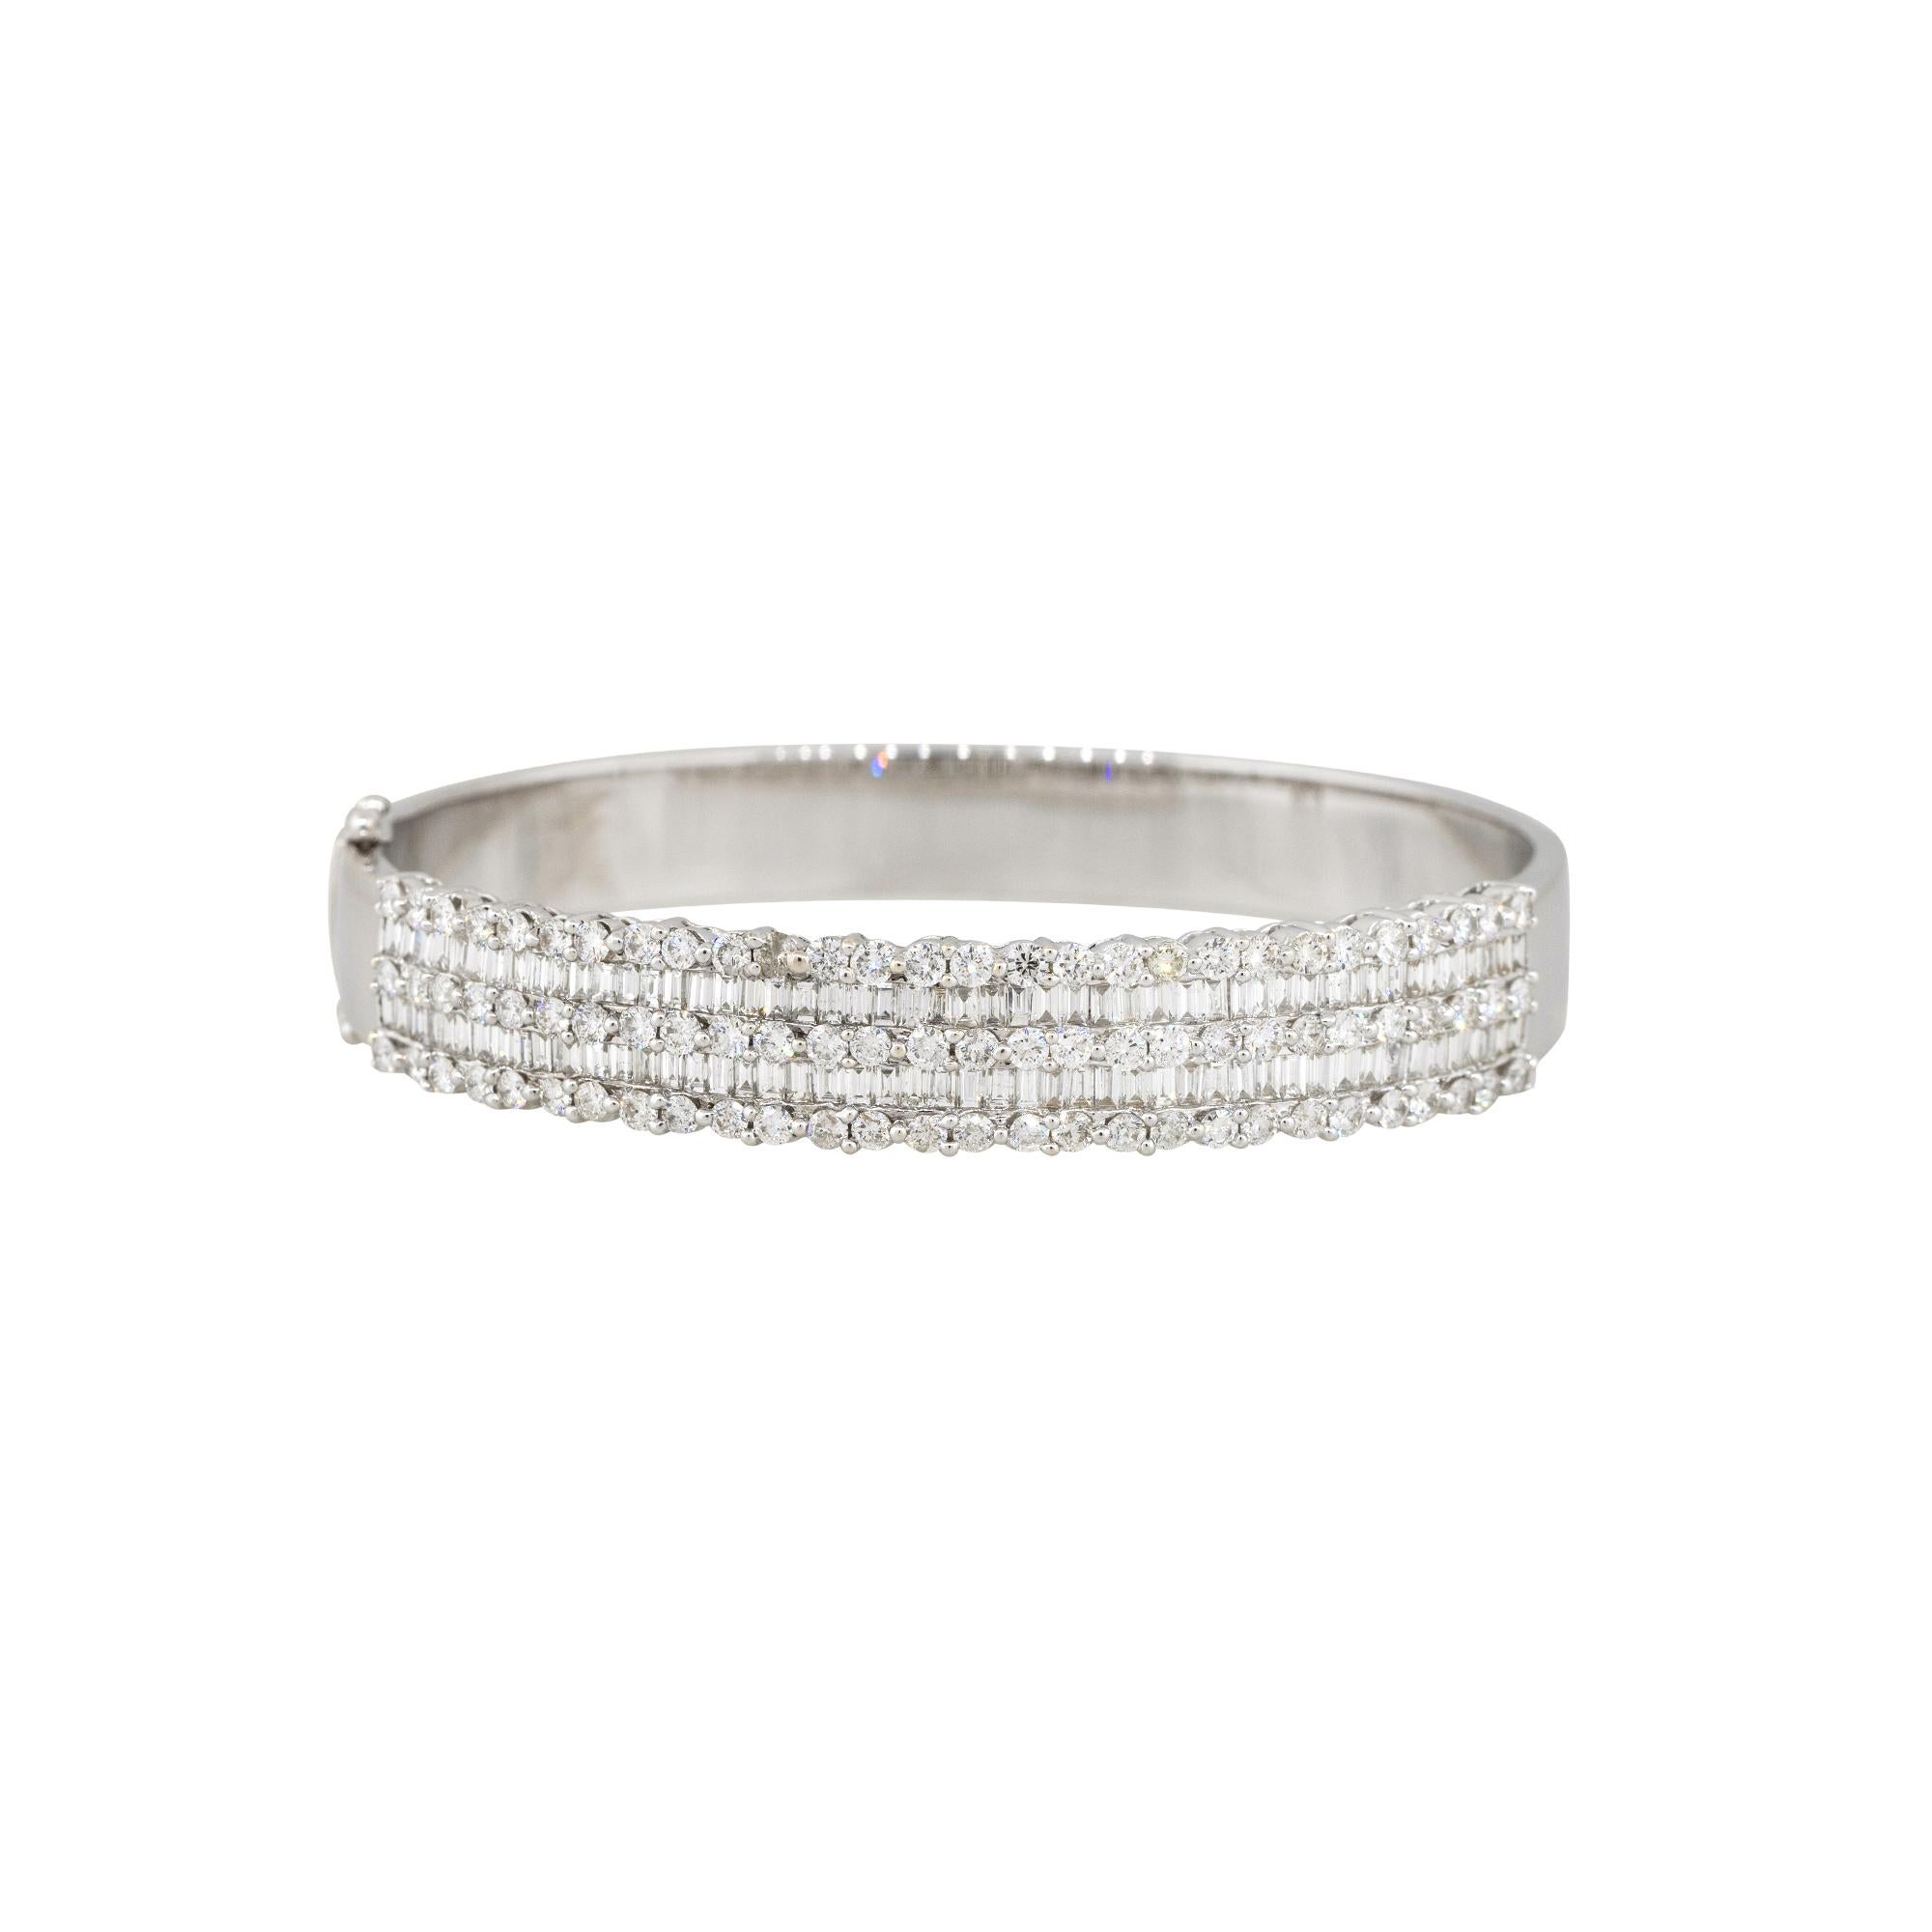 Material: 18k White Gold
Diamond details: Approx. 8ctw of round & baguette cut Diamonds. Diamonds are G/H in color and VS in clarity
Clasps: Tongue in box with safety pin
Measurements: 61.5mm x 10mm x 56.50mm
Total Weight: 31.1g (20dwt) 
Additional